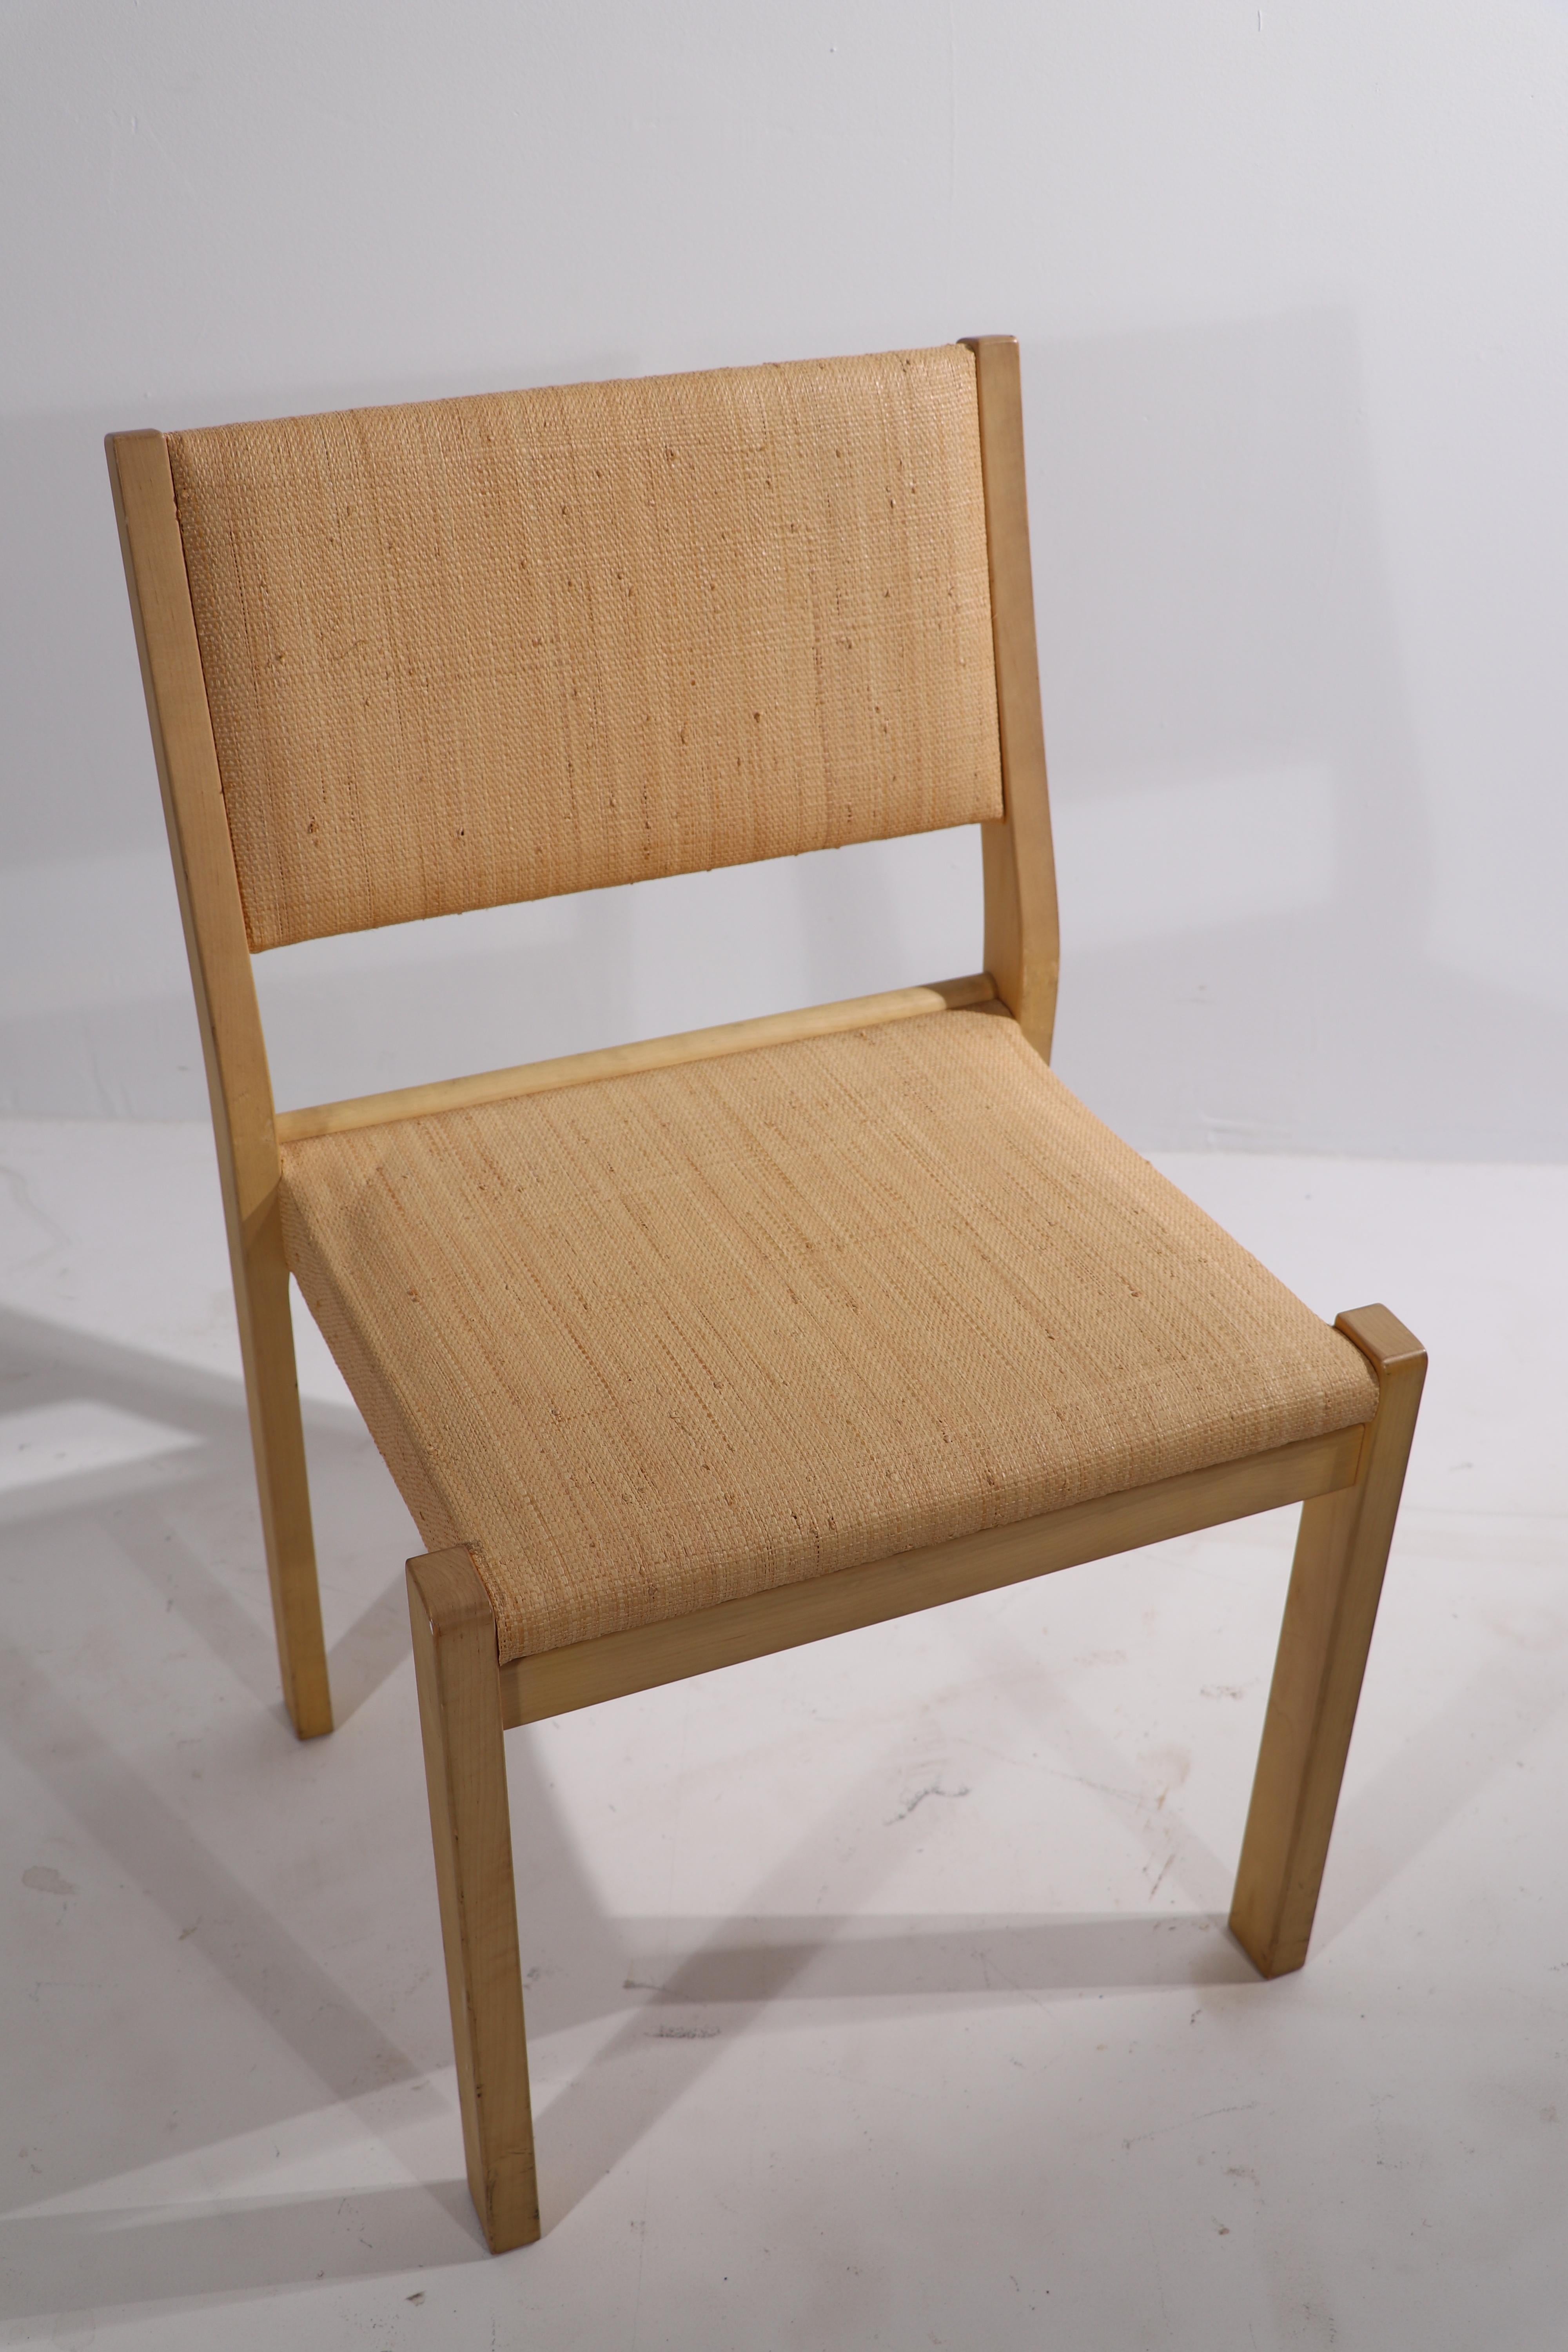 Classic Model 611 ding chairs designed by Alvar Aalto for Artek, Made in Finland. These chairs are unusual in that they have rush seats and backs as opposed to the more common webbed seats. Circa 1970's or possibly 1980's, all are in very good,